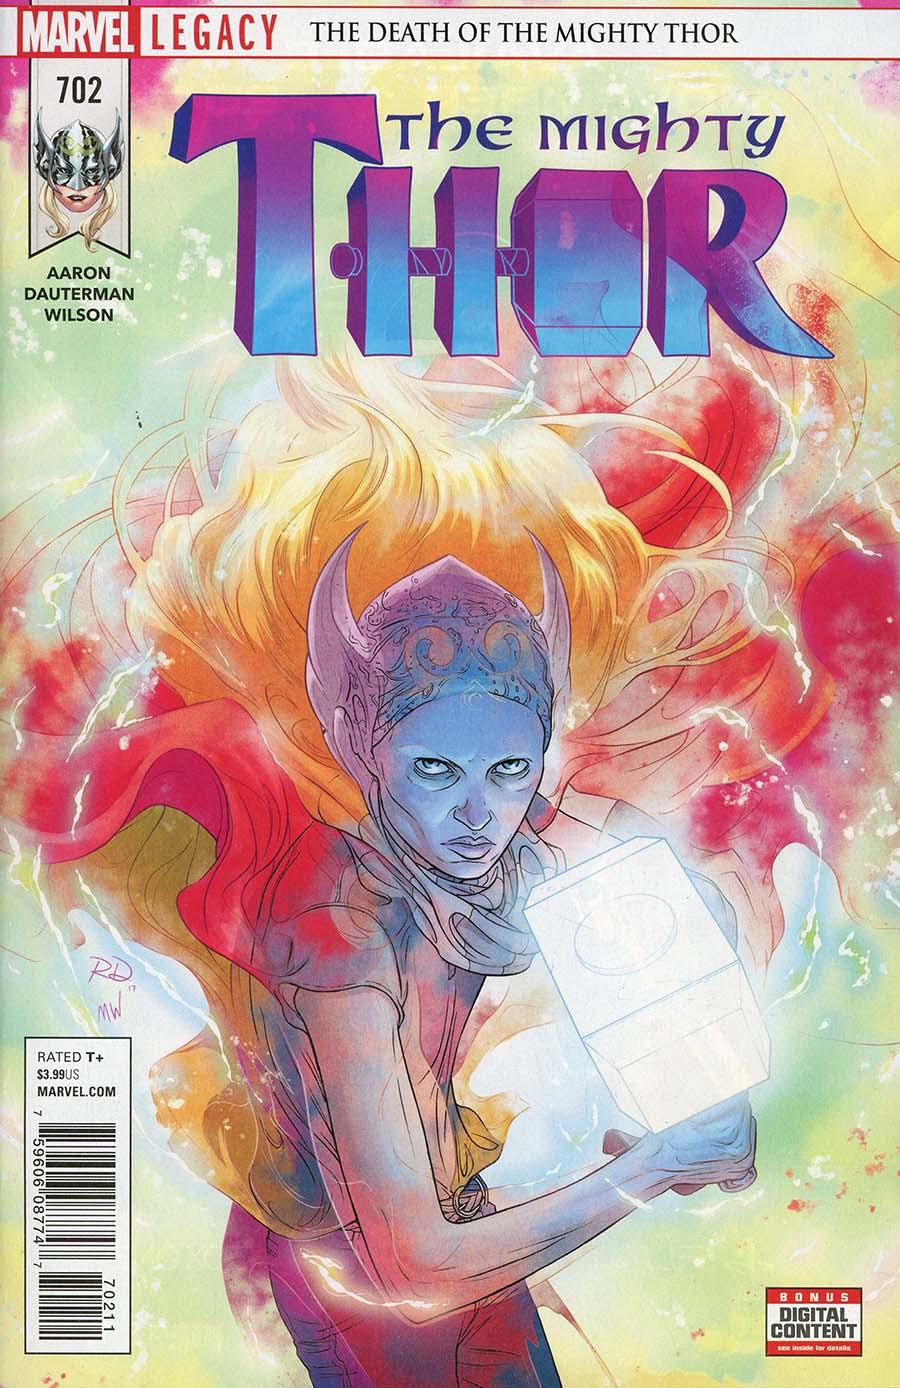 The Mighty Thor Vol. 2 #702